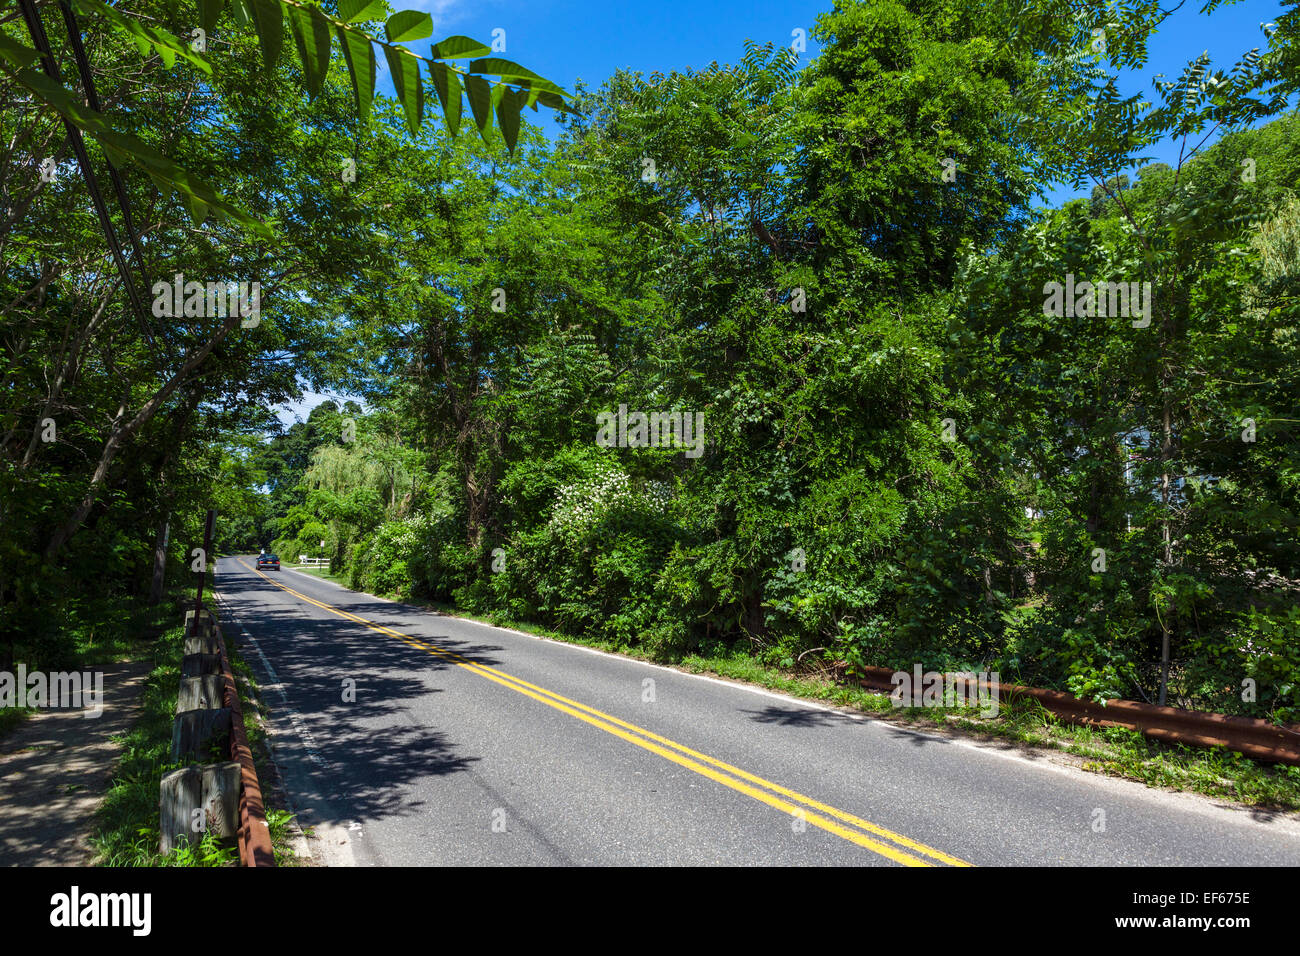 Country road in Cold Spring Harbor, Huntington, comté de Suffolk, Long Island, NY, USA Banque D'Images